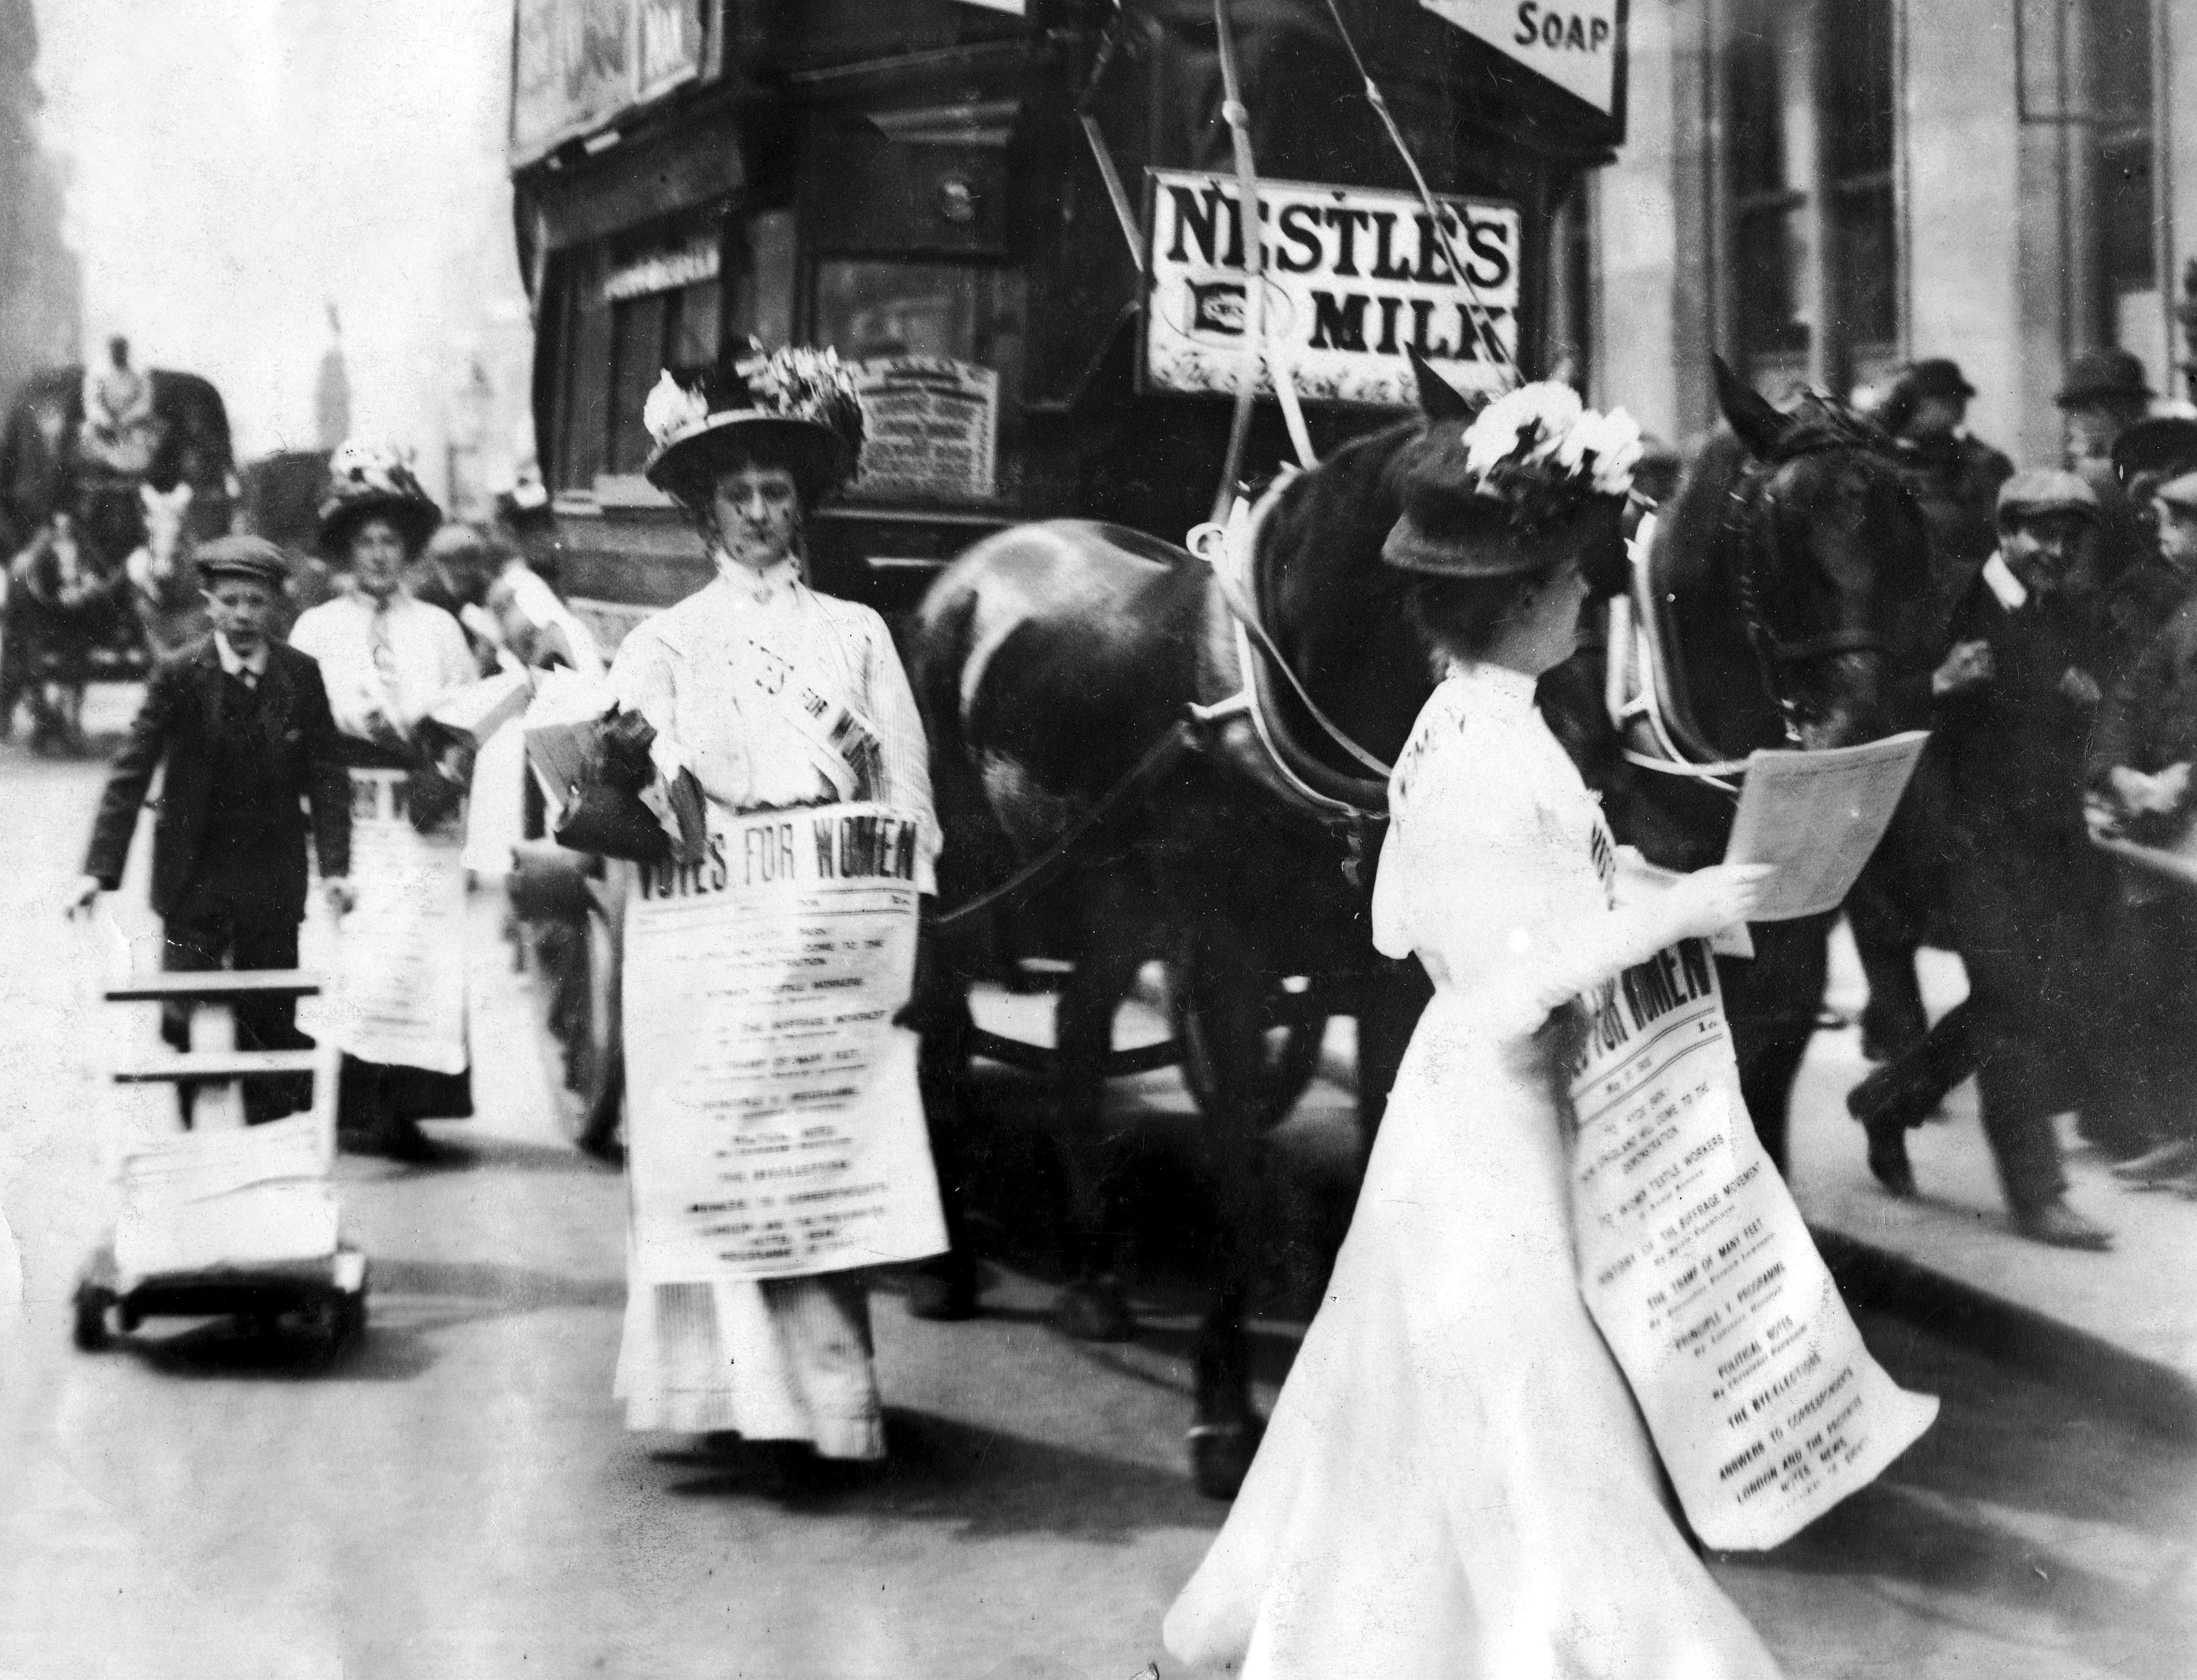 Image of women marching in London, 1908, with signs advocating for women’s right to vote.